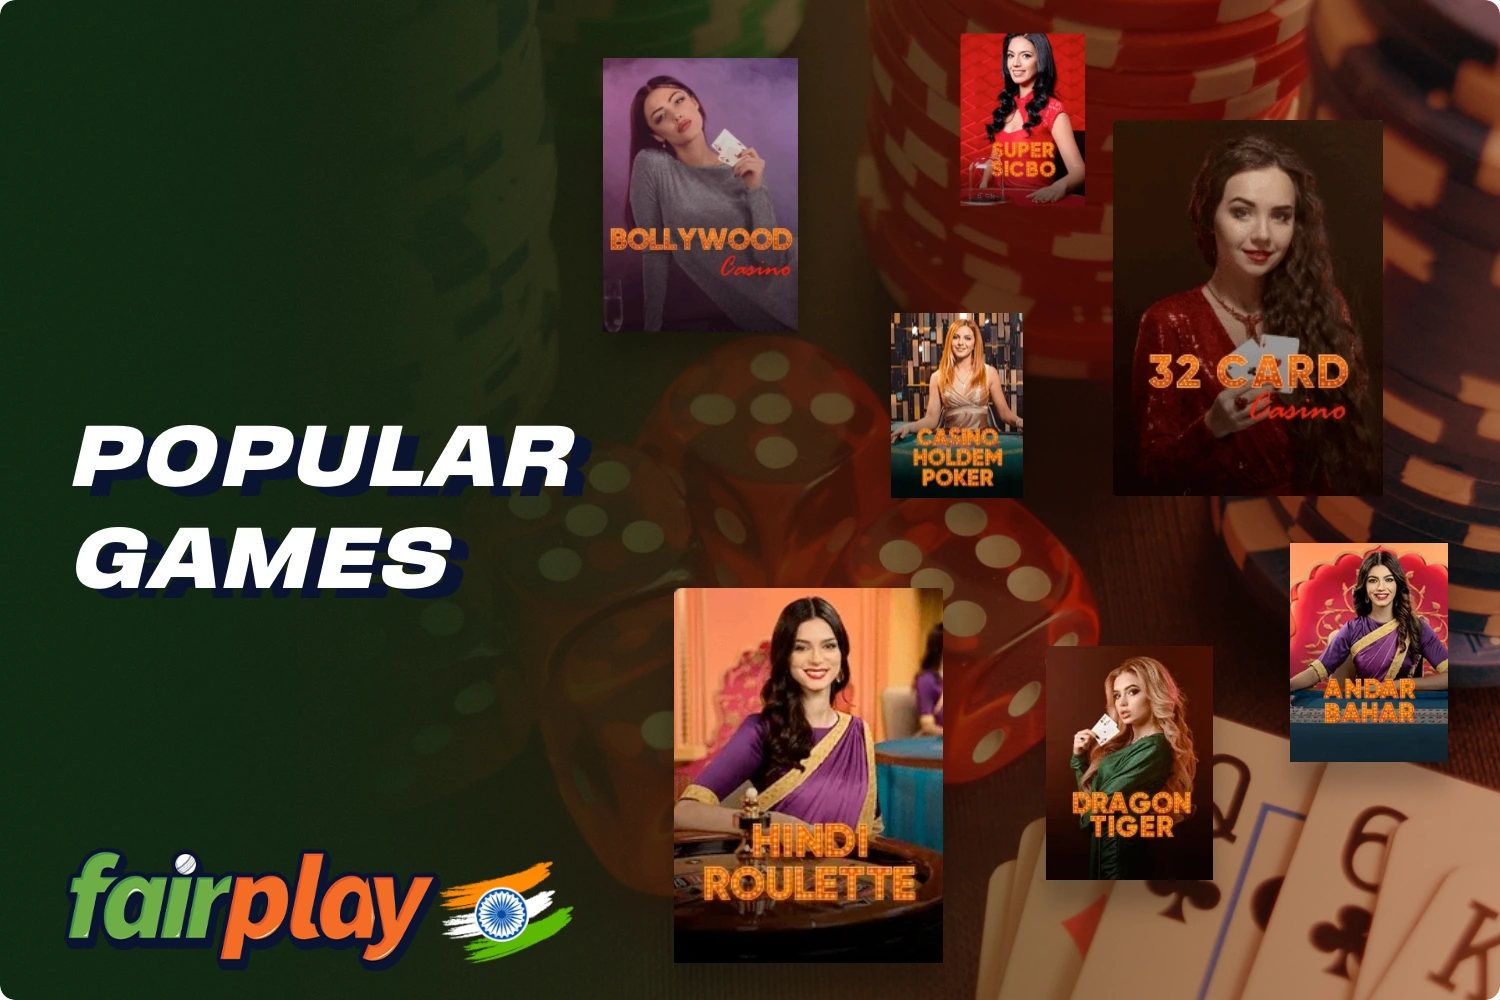 Among others, Fairplay has the top popular games that are most often chosen by users from India